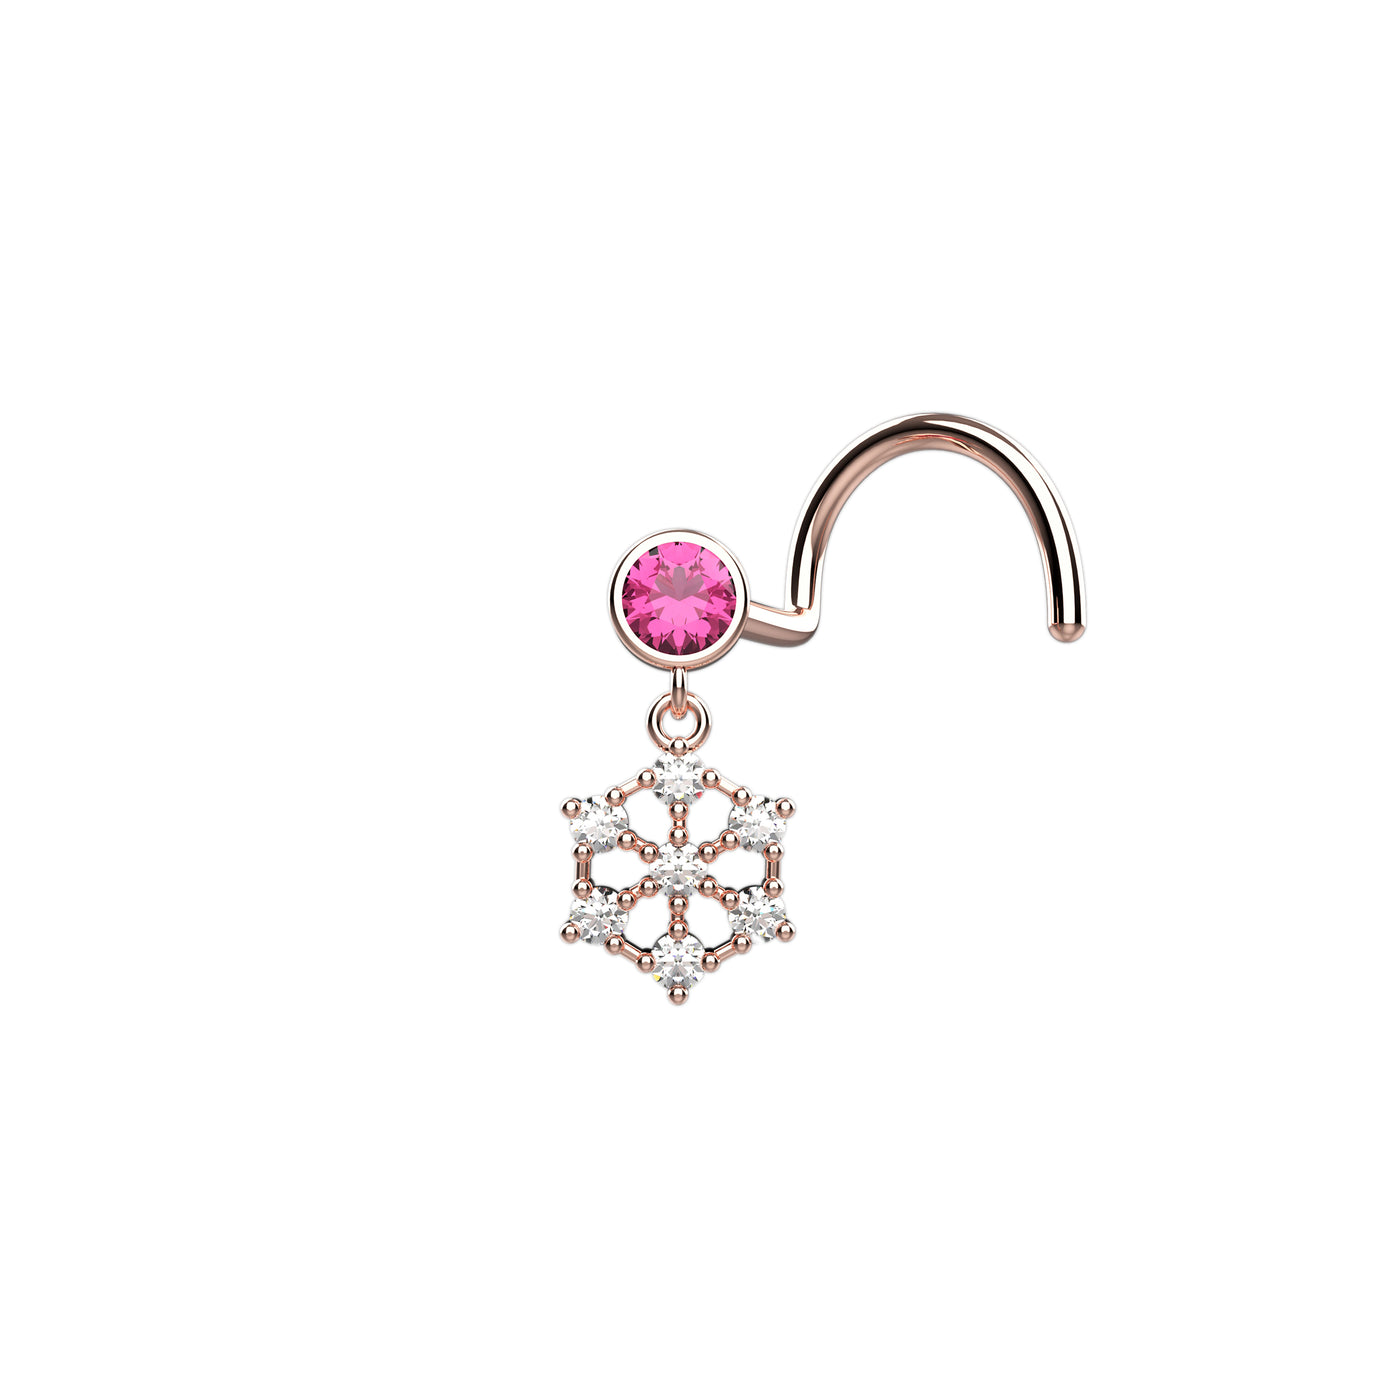 Snowflake Ruby Stone Claw-Set Dangle Nose Stud